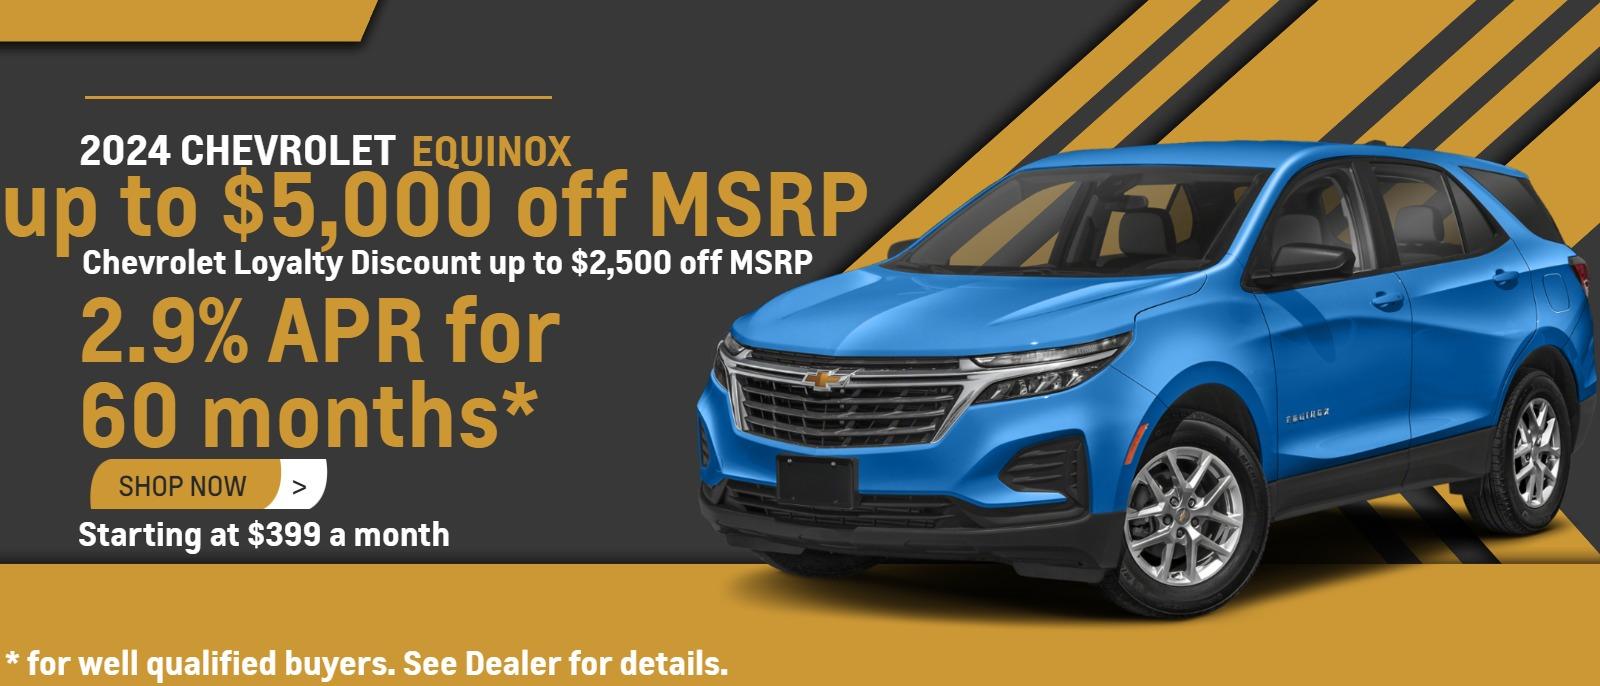 2024 Equinox up to $5,000 off MSRP 2.9% APR for 60 months for well qualified buyers